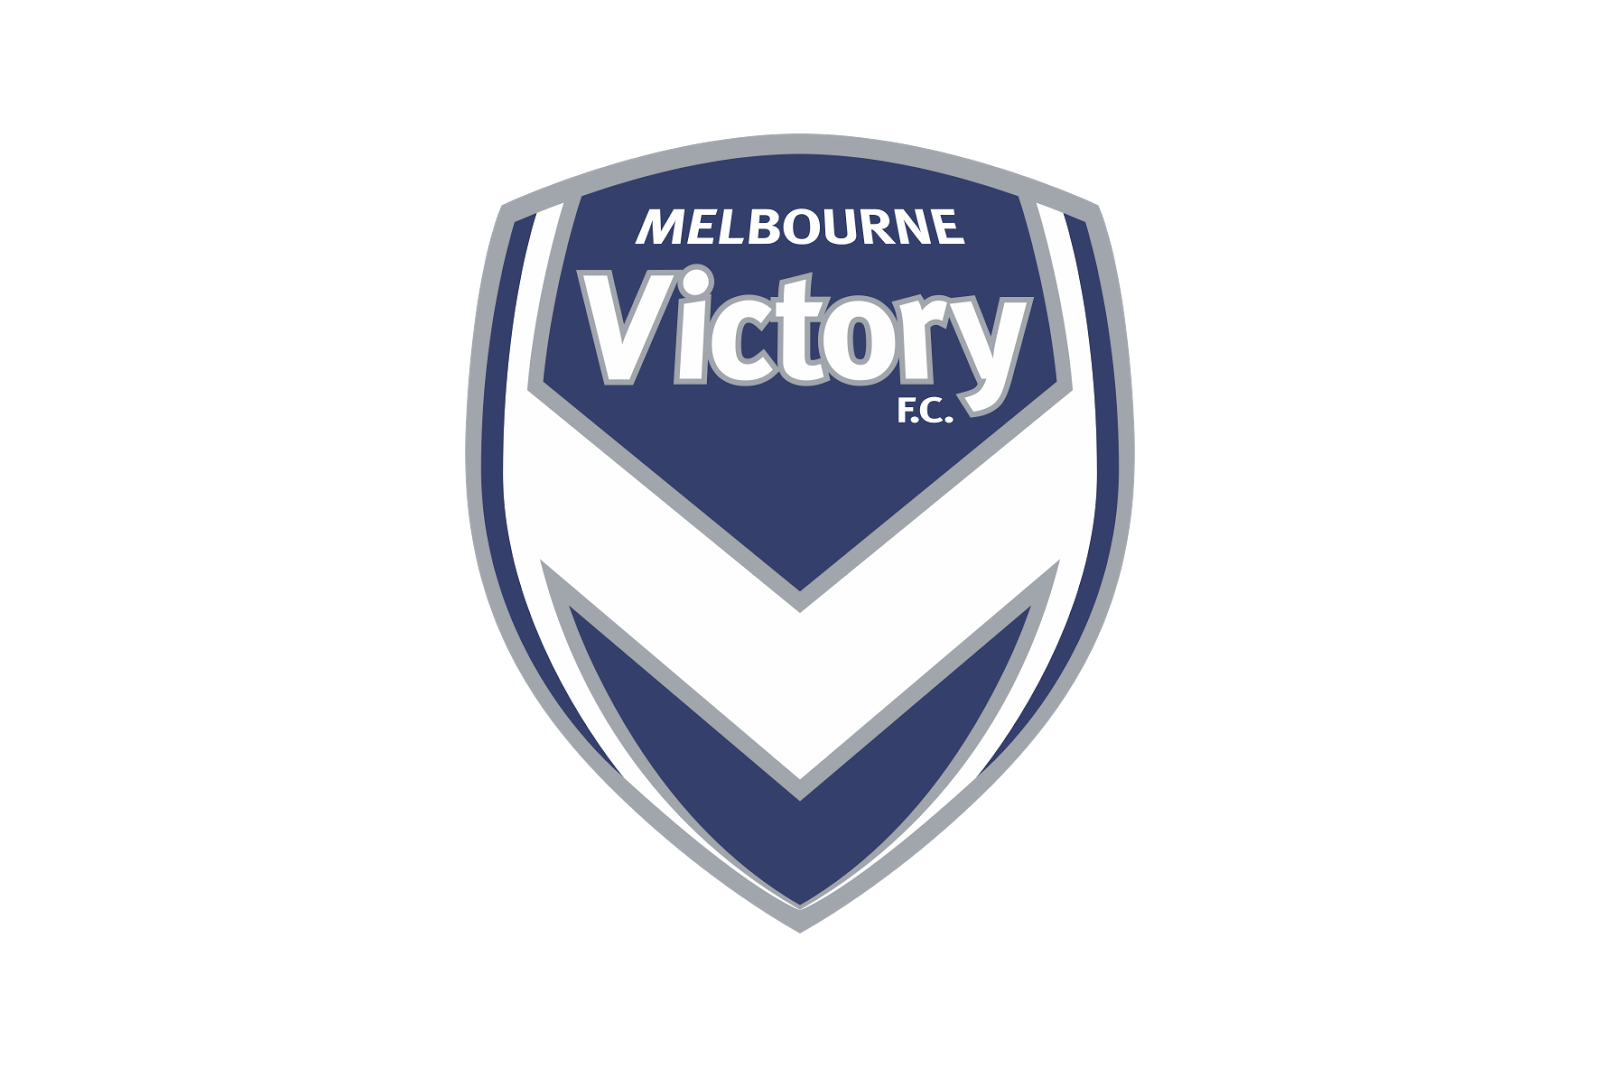 Melbourne victory